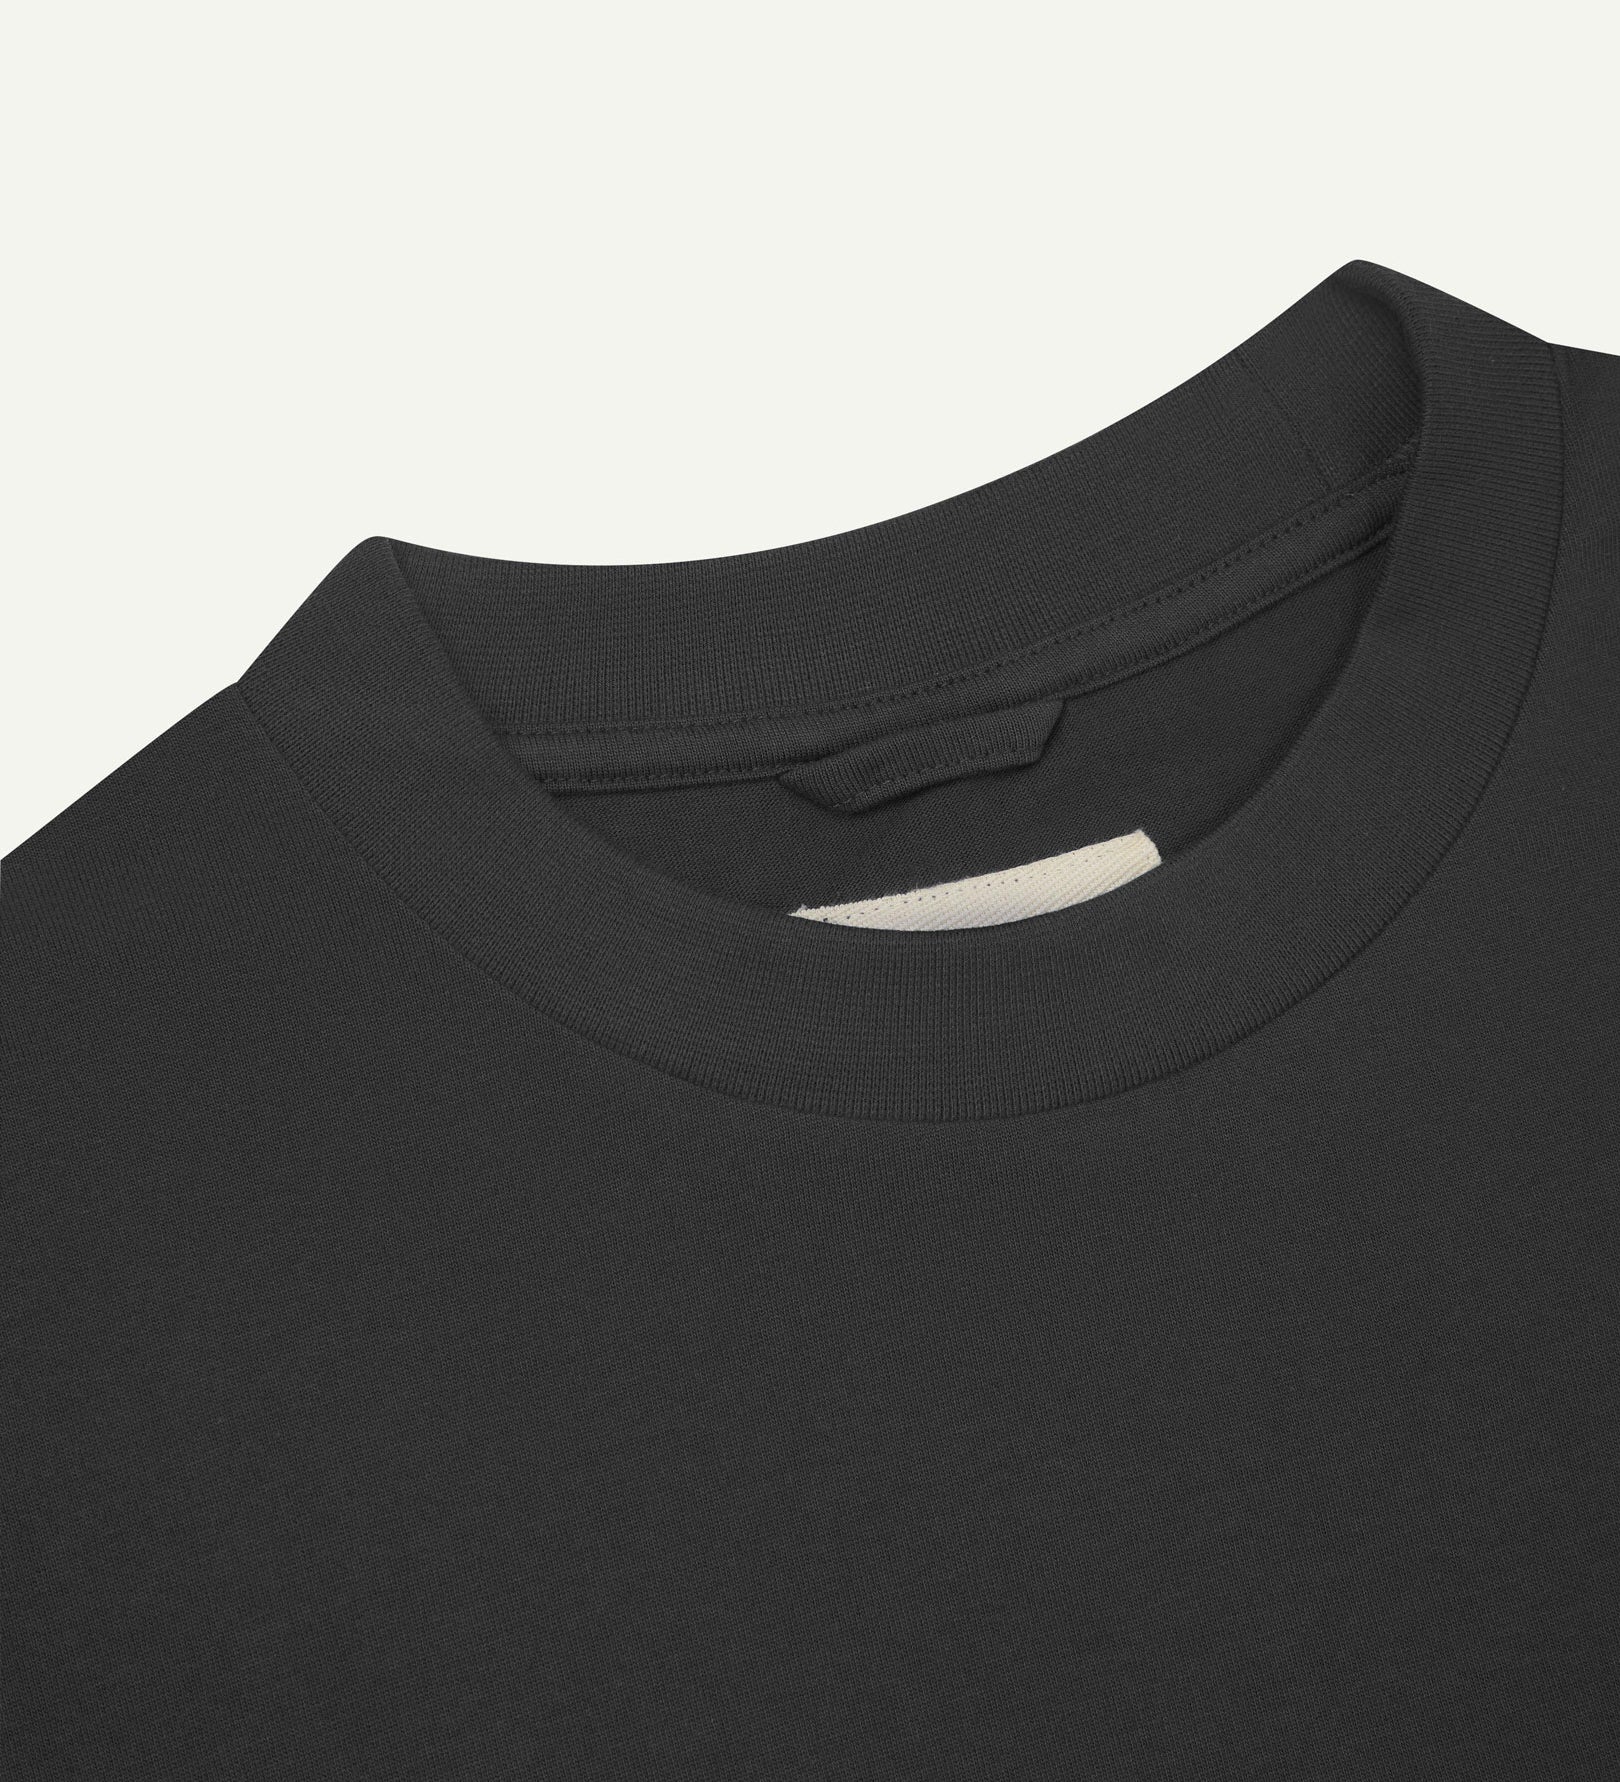 Neckline close-up of faded black organic cotton oversized T-shirt showing hanging loop and Uskees branding label.